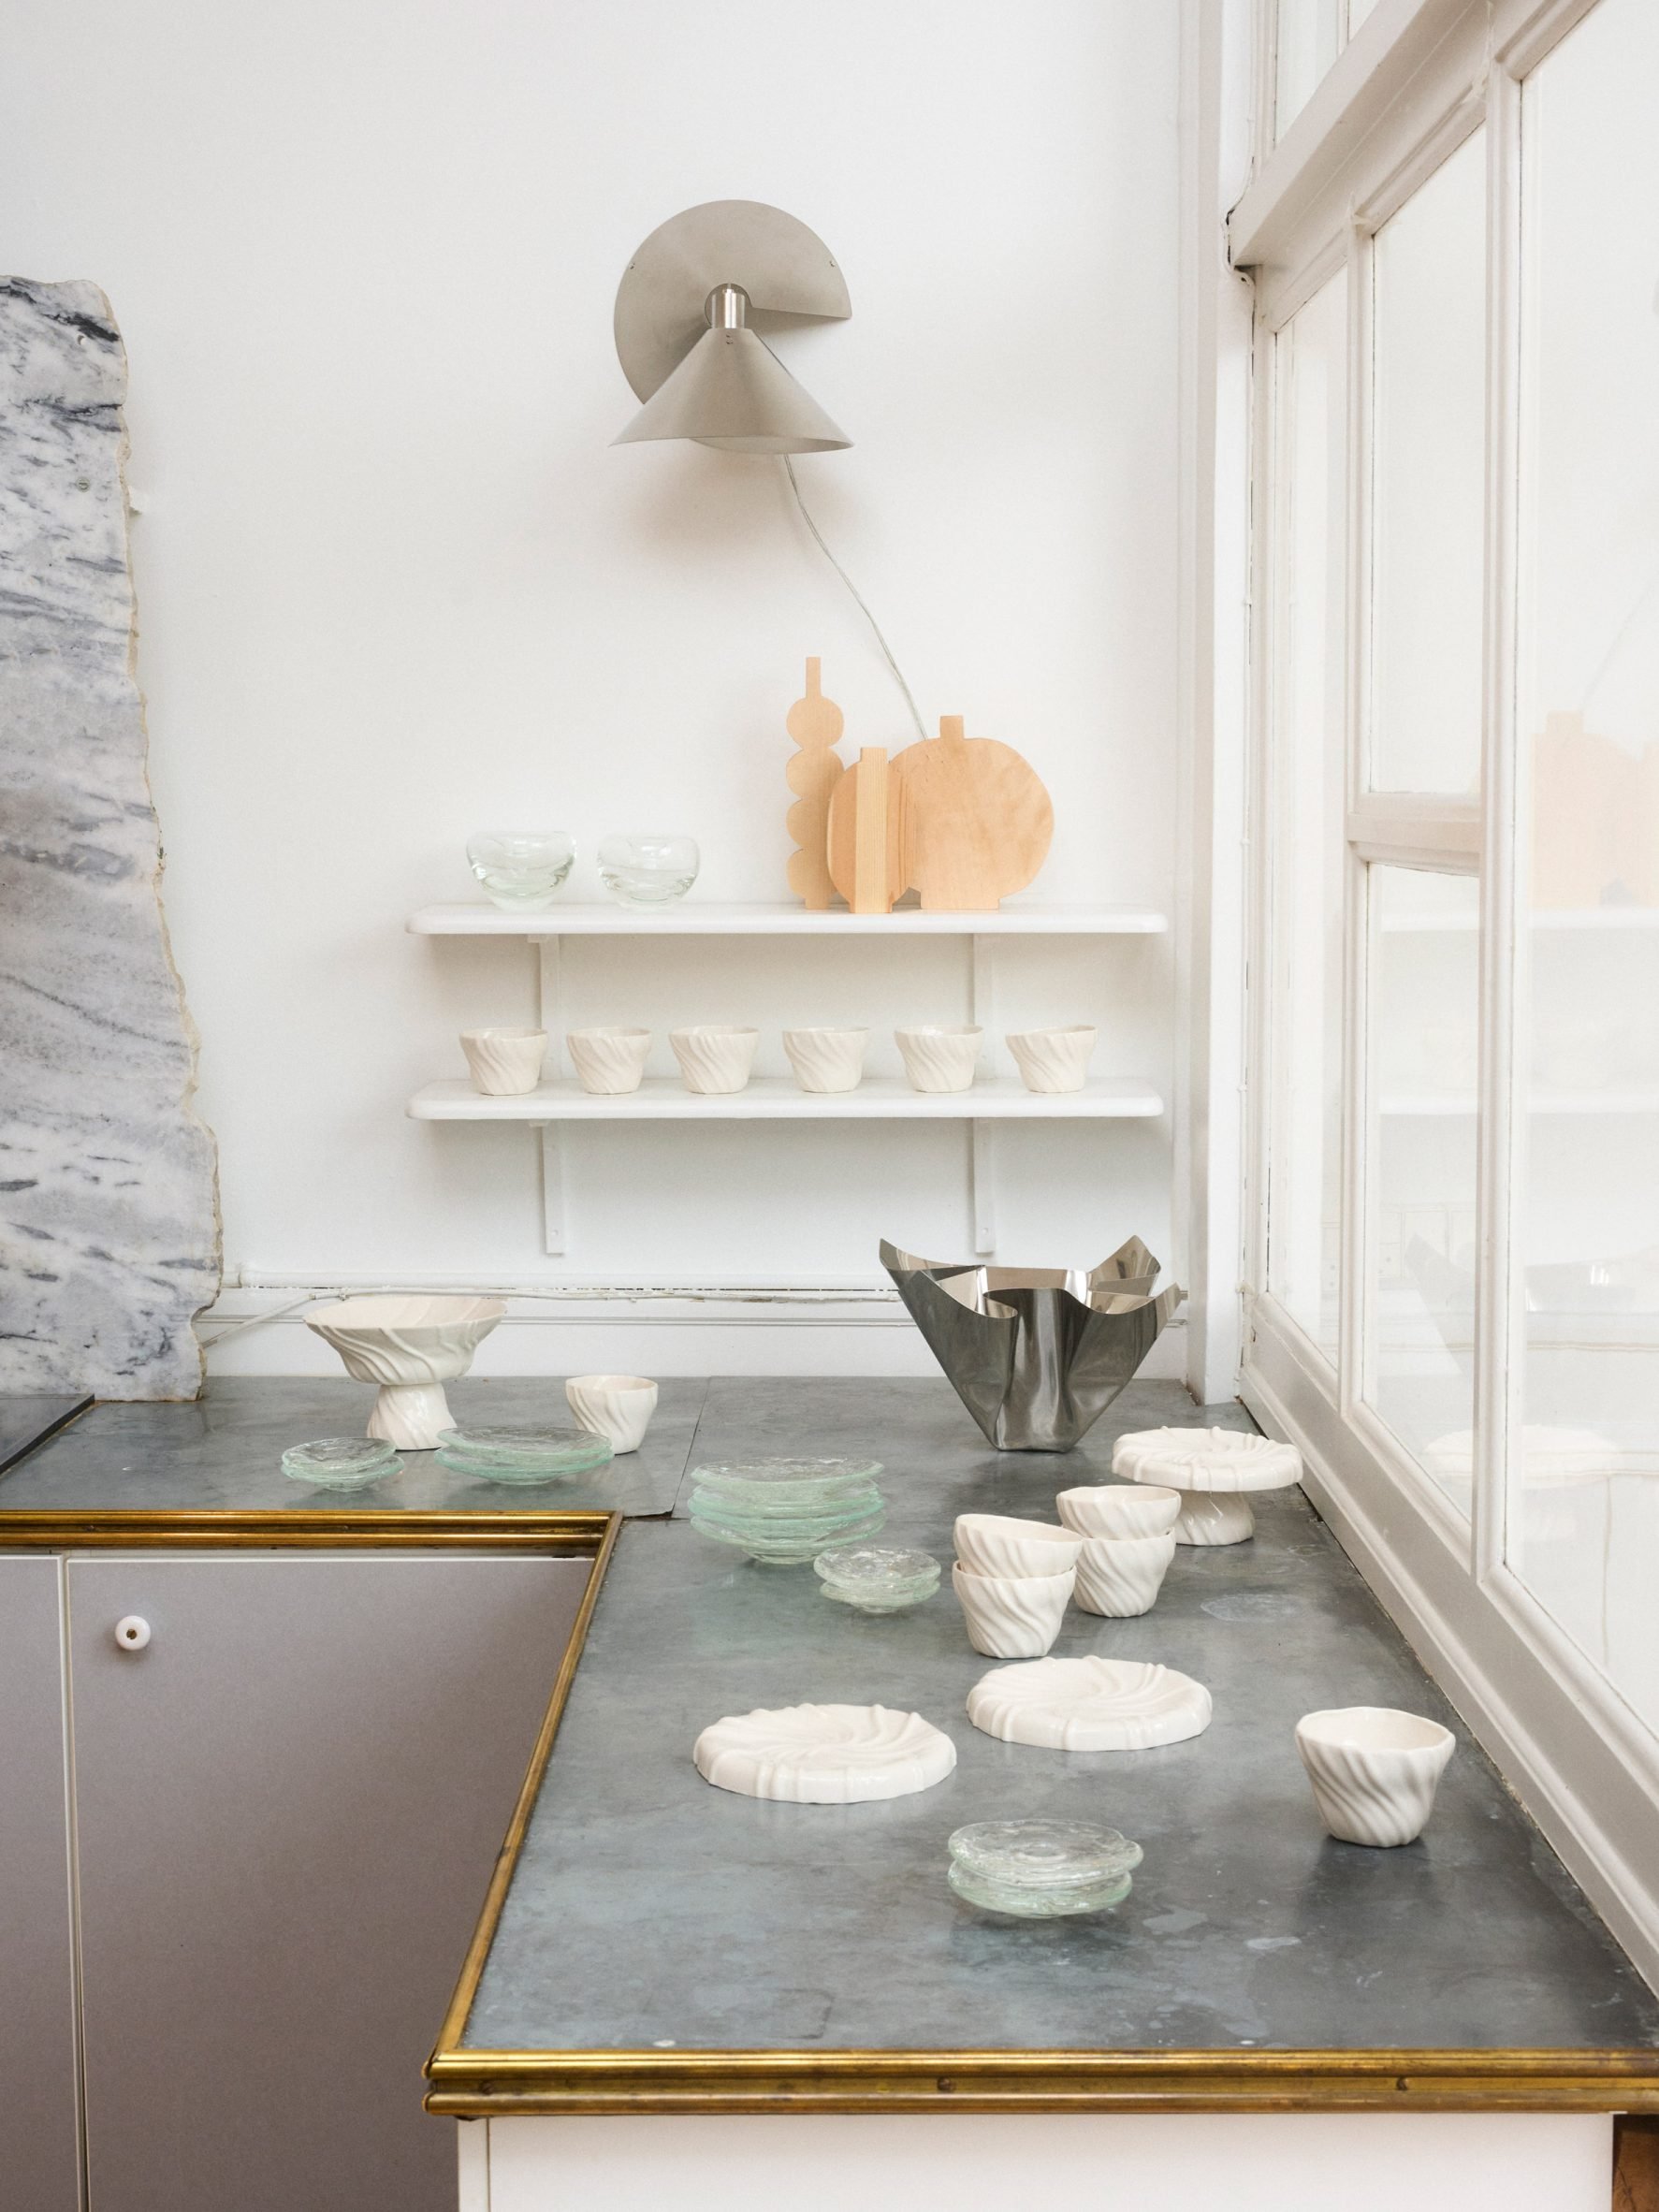 Vases by Moa Markgren and ceramics by Atelier Marée at NoDe exhibition by House of Nordic Design